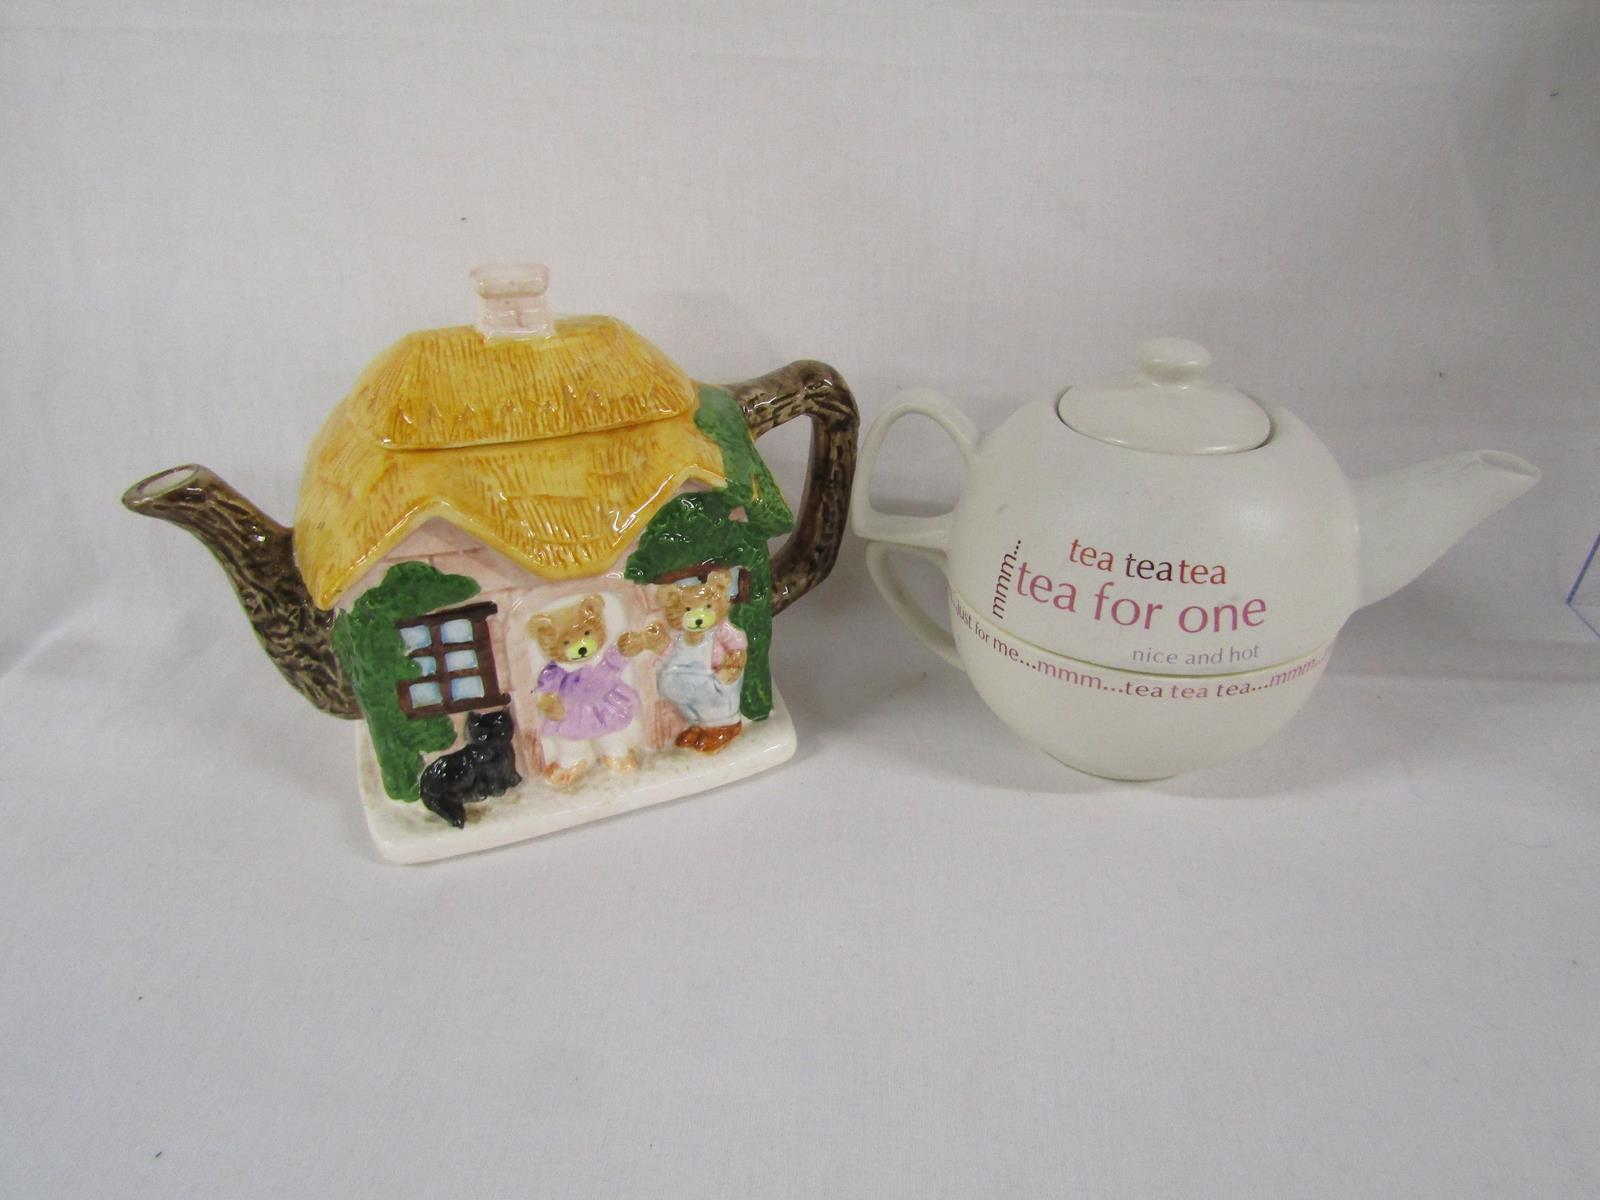 12 teapots includes Leonardo Antiques, theatre royal and country manor, florist, tea for one, The - Image 4 of 7